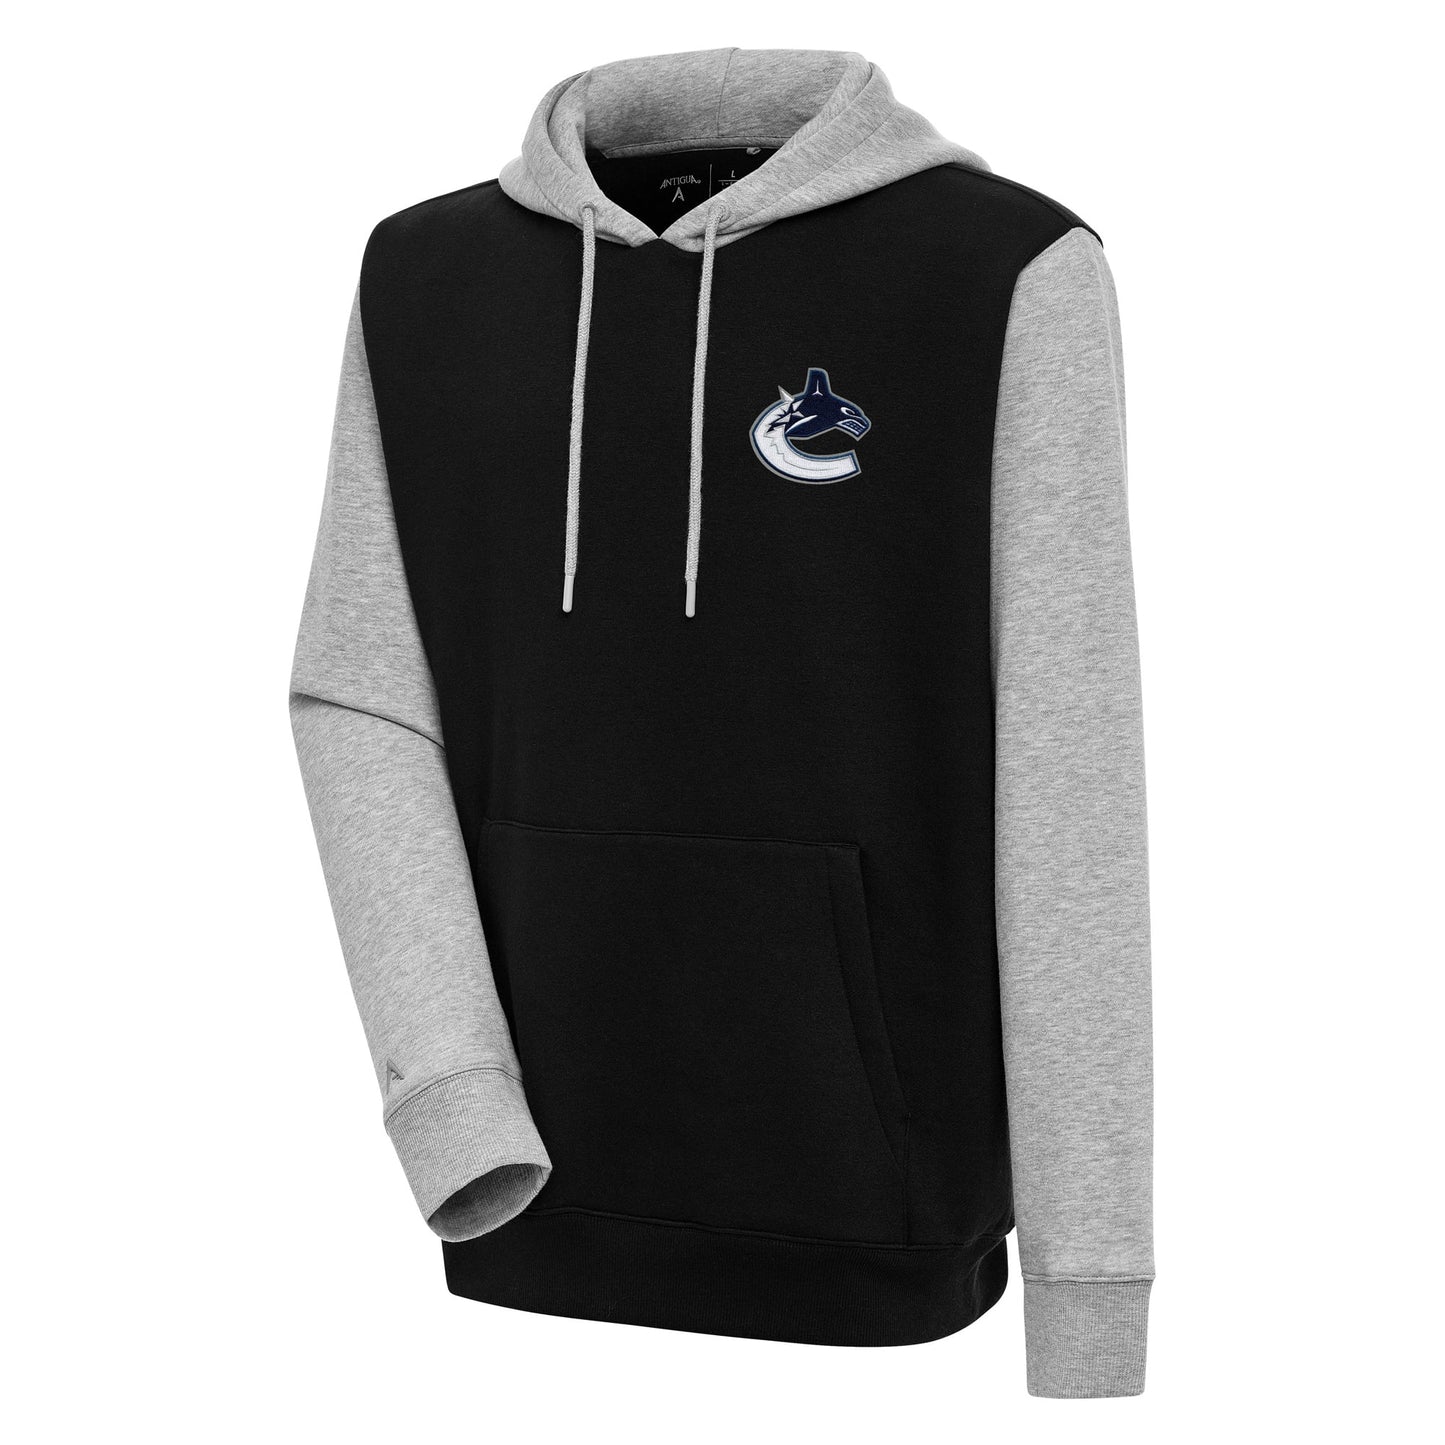 Men's Antigua  Black/Heather Gray Vancouver Canucks Victory Colorblock Pullover Hoodie